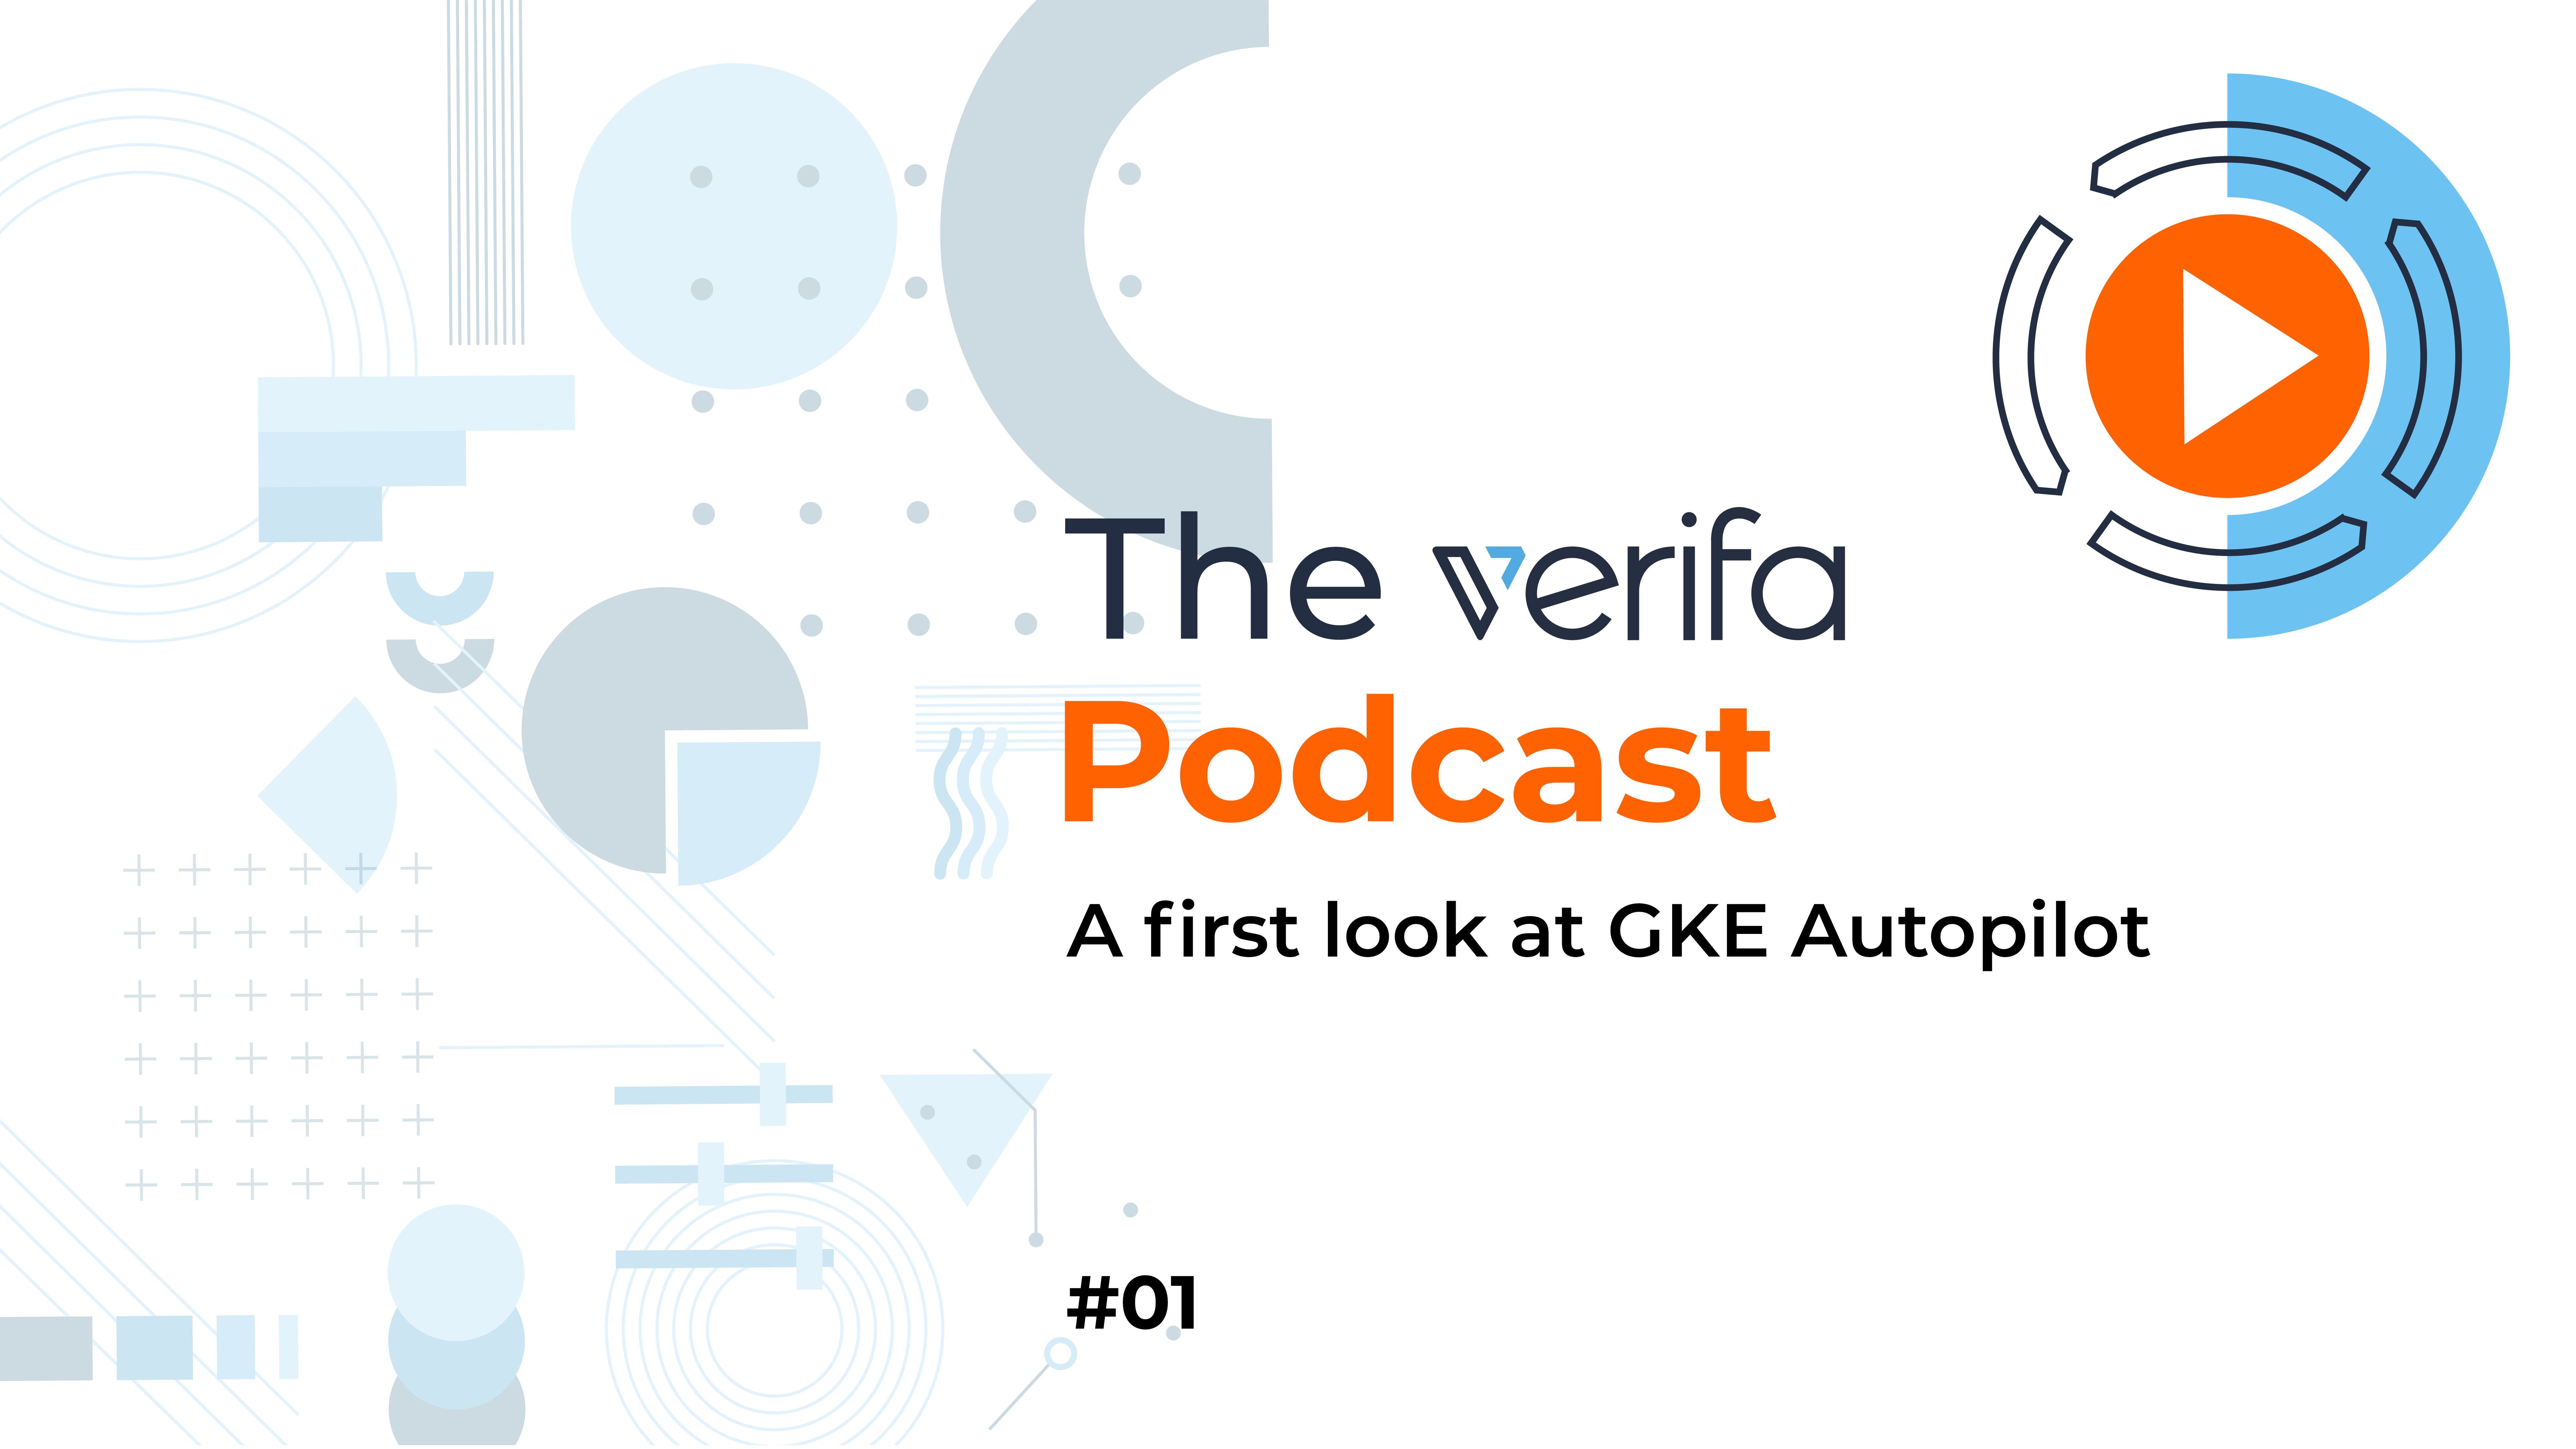 A first look at GKE Autopilot